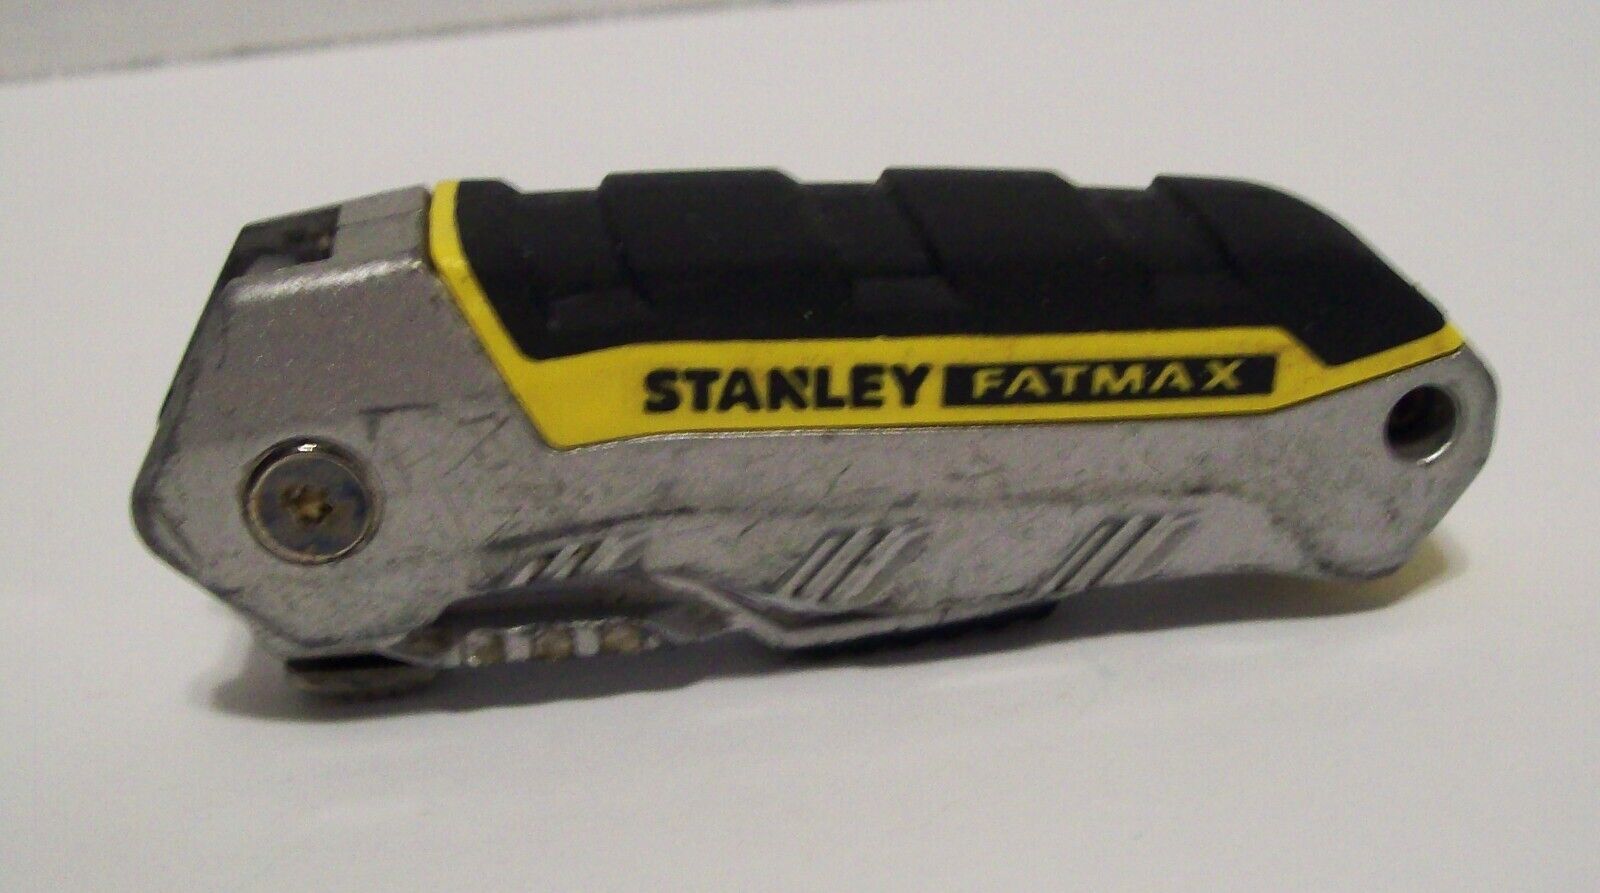 Stanley Fat Max Folding Lock Blade Cutter - Pre-owned in Good Condition